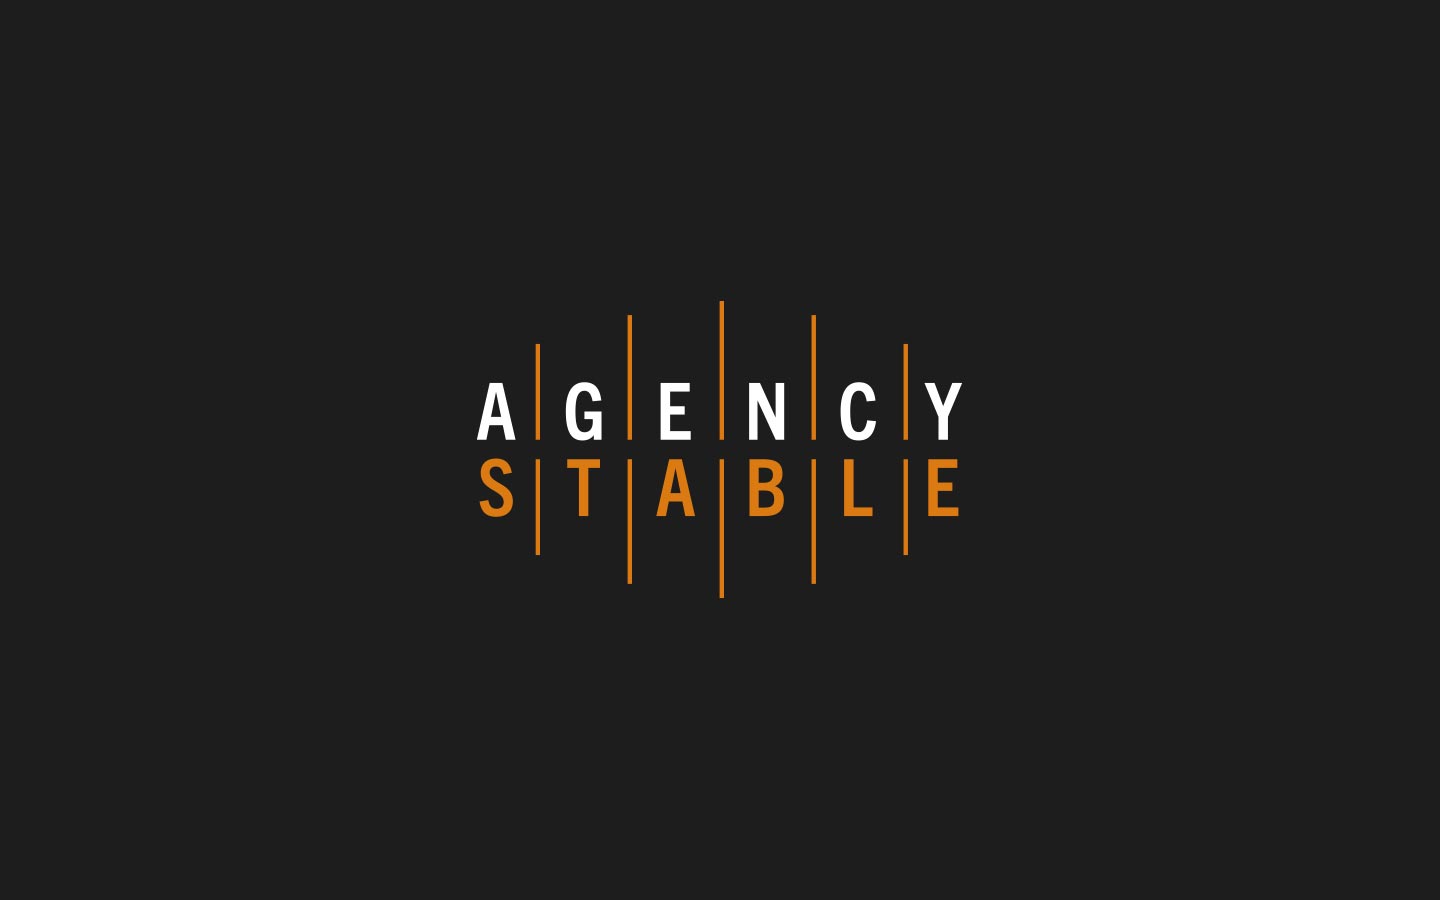 Agency stable logo